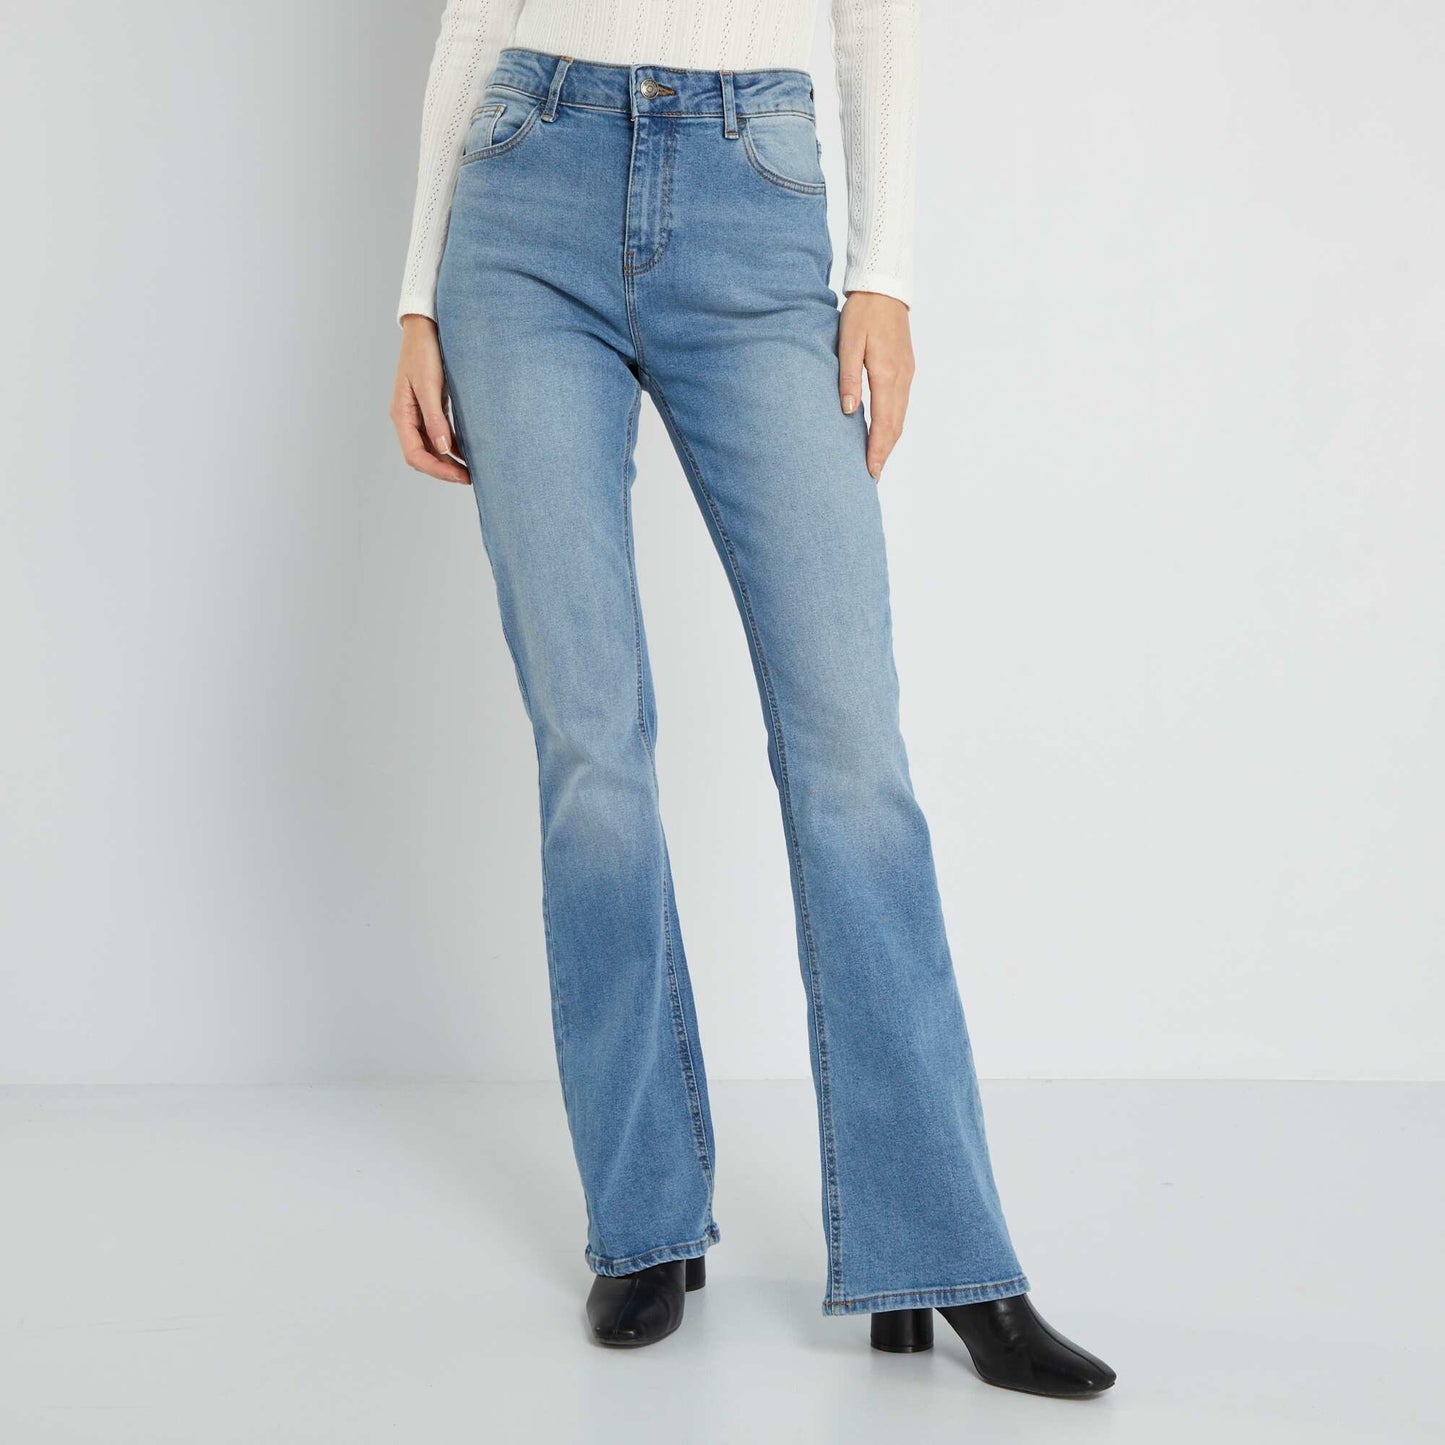 Jean flare/bootcut - L30 Double stone